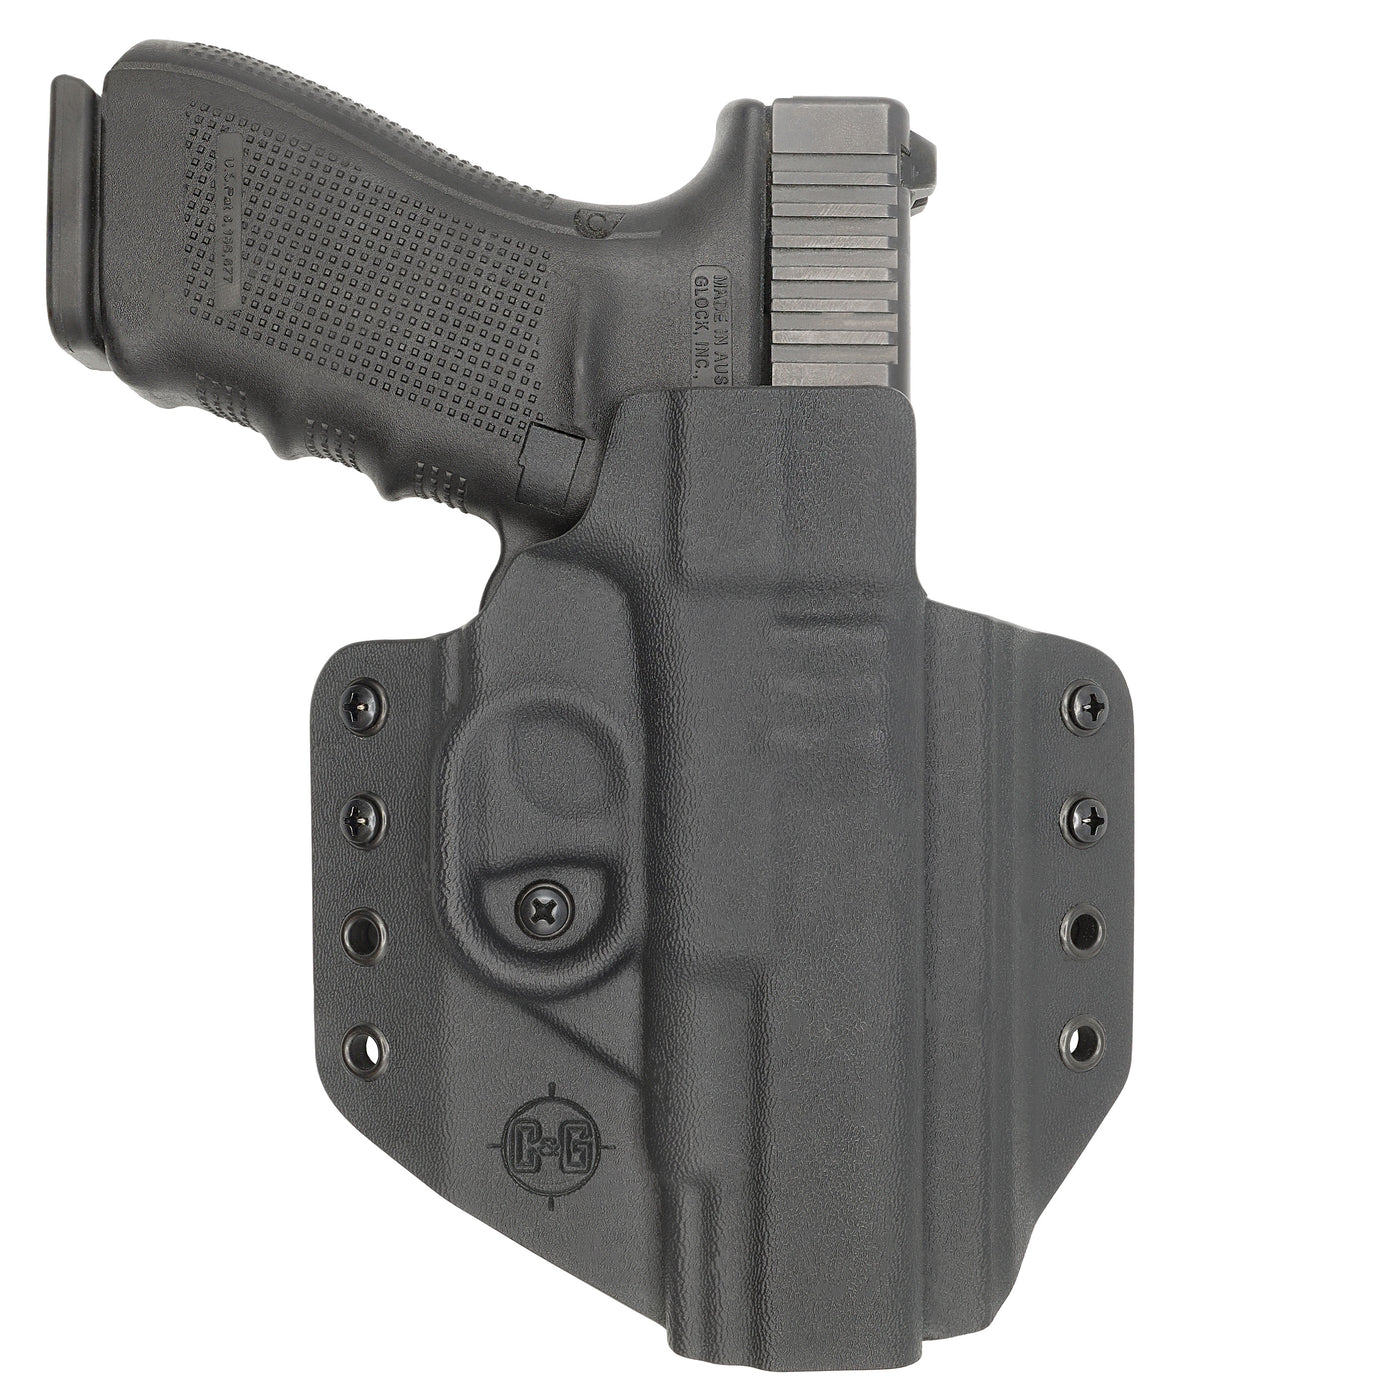 C&G Holsters quickship OWB covert Glock 20/21 in holstered position